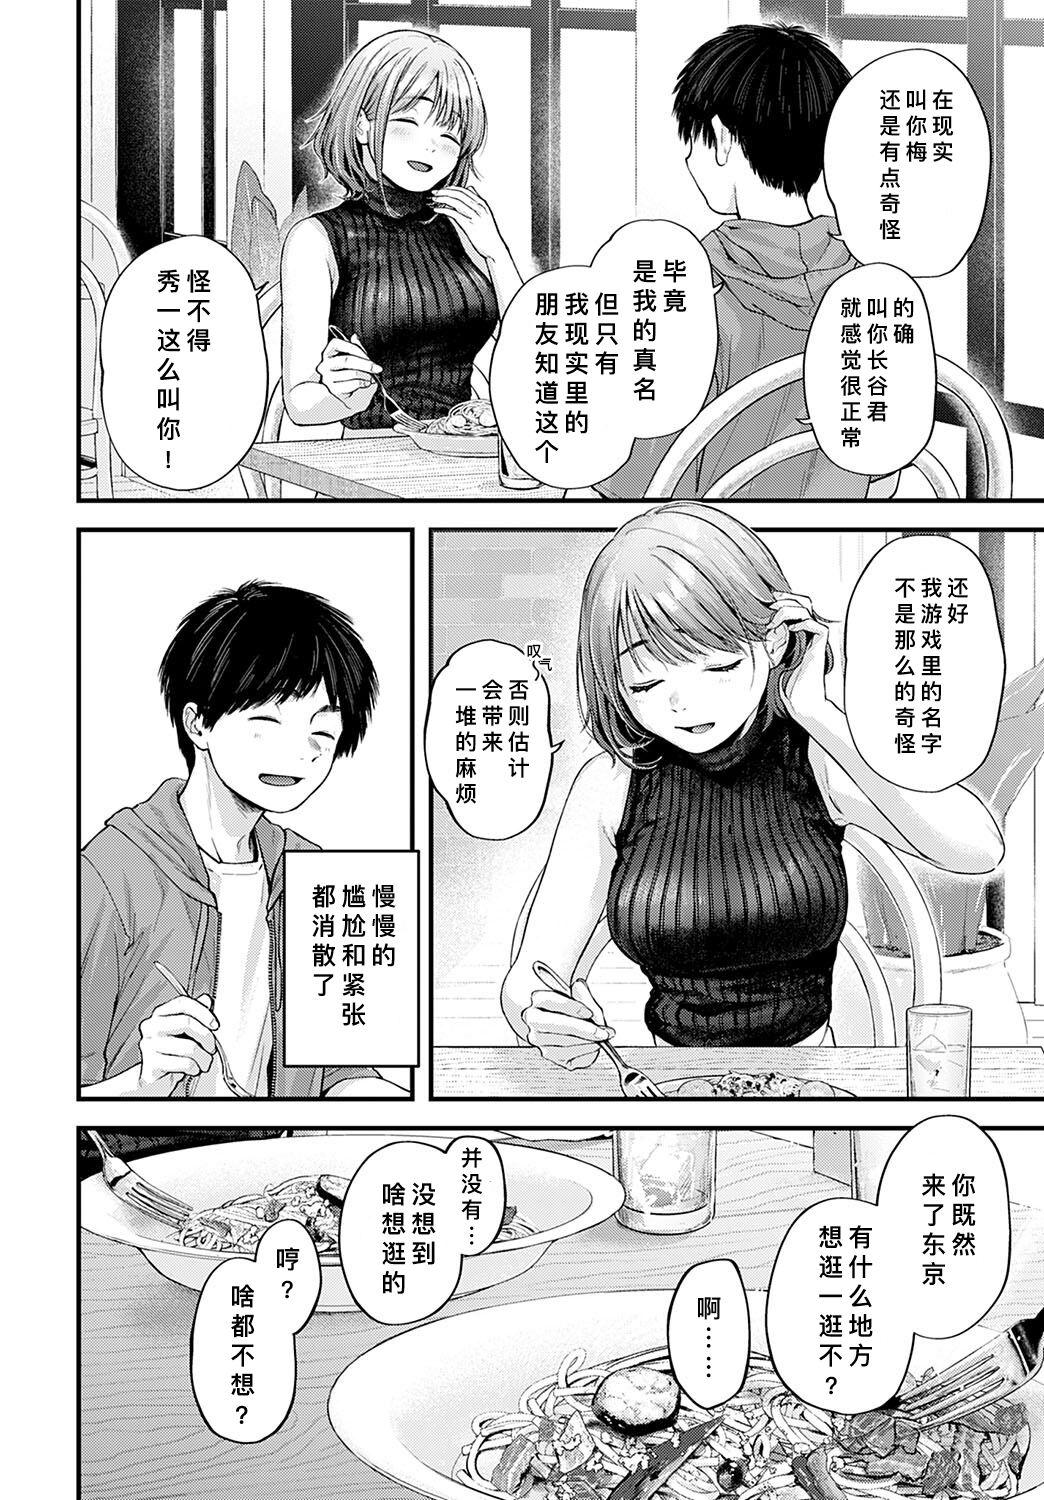 Cartoon Tokyo Expedition Off-line Sex Report Machine - Page 6